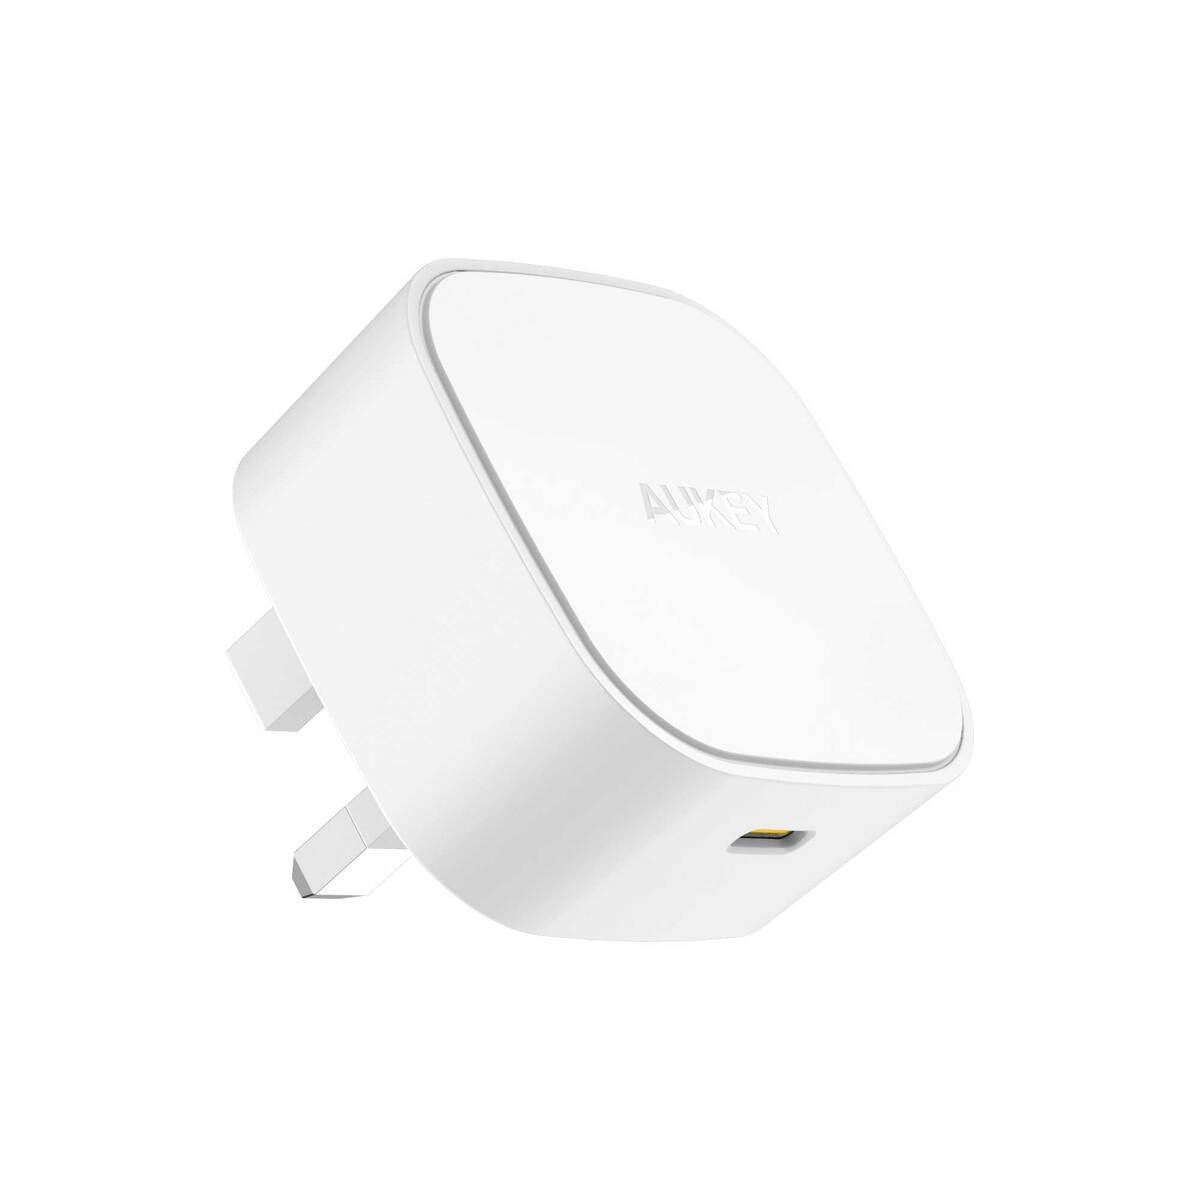 Aukey PA-Y25 USB Type-C Charger White